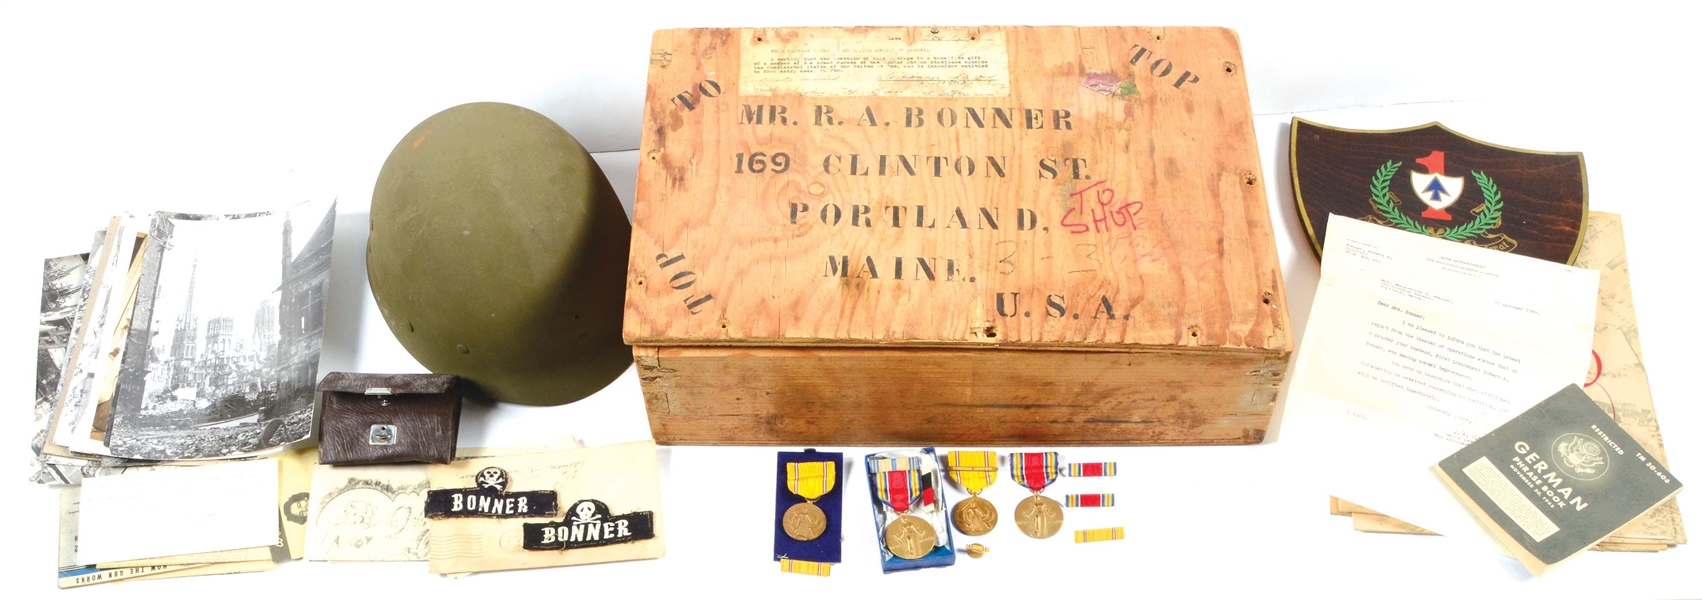 LOT OF US WWII EPHEMERA FROM LT. ROBERT A. BONNER, 1ST INFANTRY DIVISION, D-DAY VETERAN, AND SILVER STAR RECIPIENT.